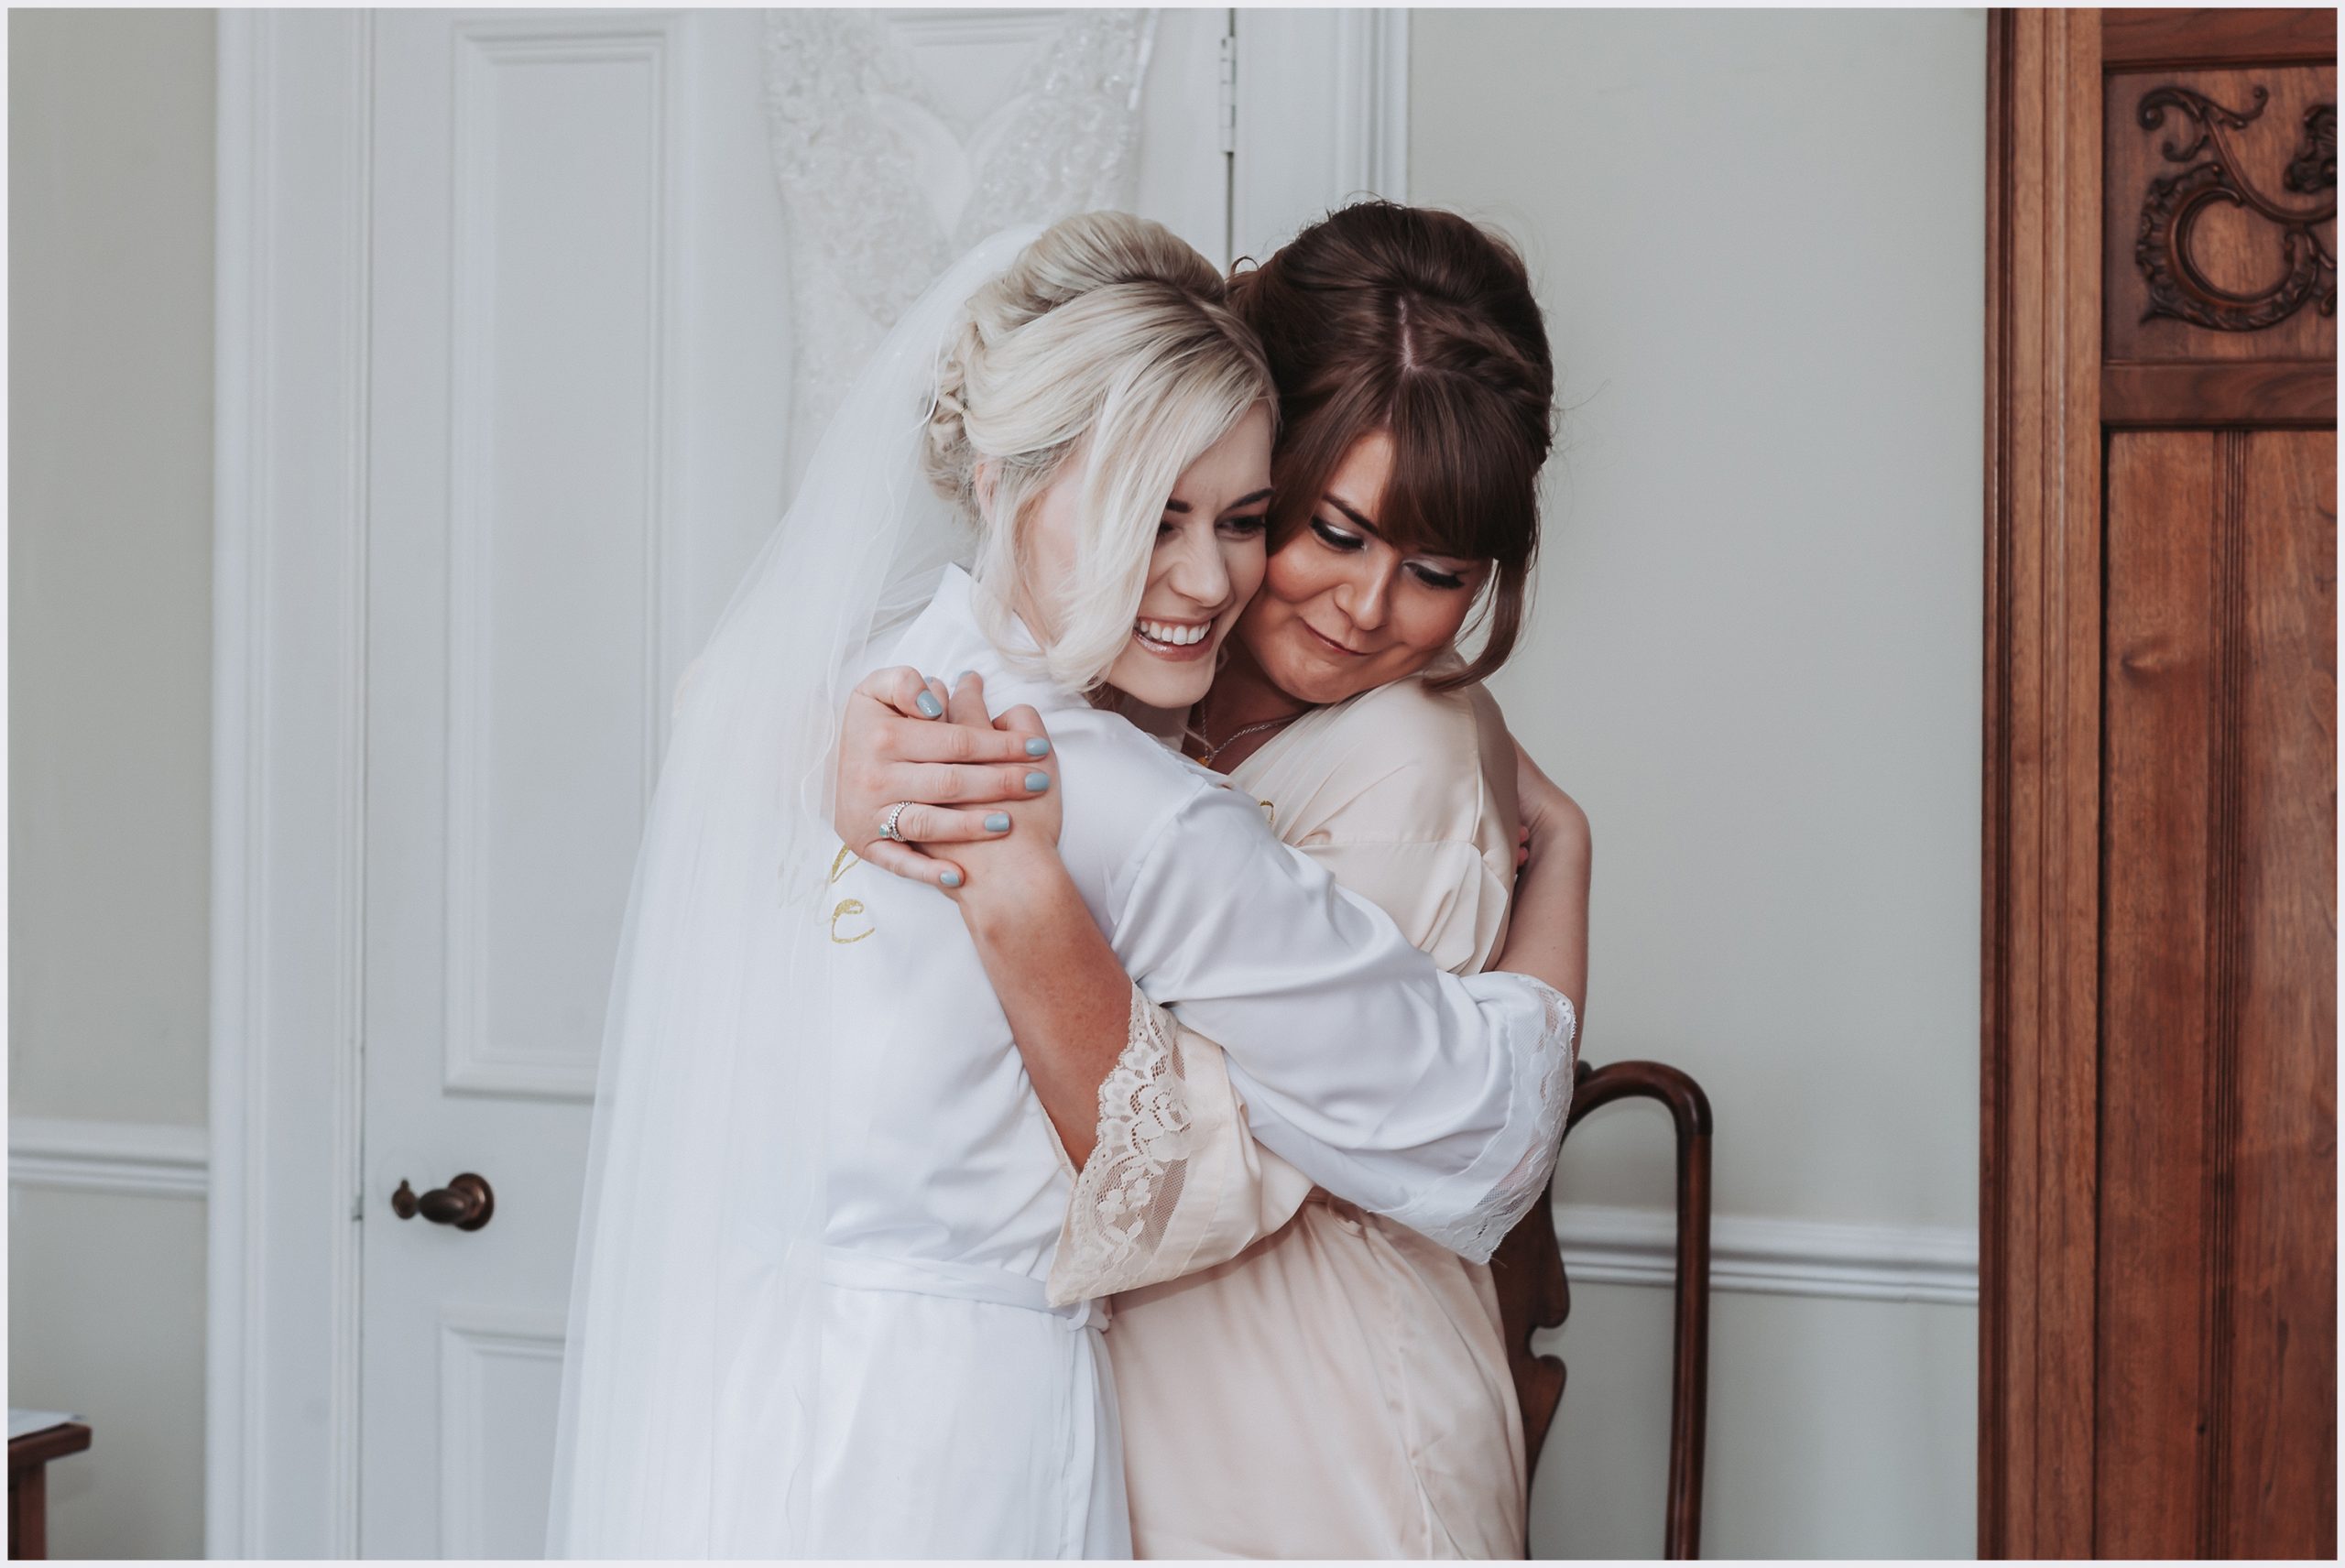 A bride and her bridesmaid embrace smiling on the morning of the wedding.  Image captured by Helena Jayne Photography by north Wales based photographer Helena Jayne Photography